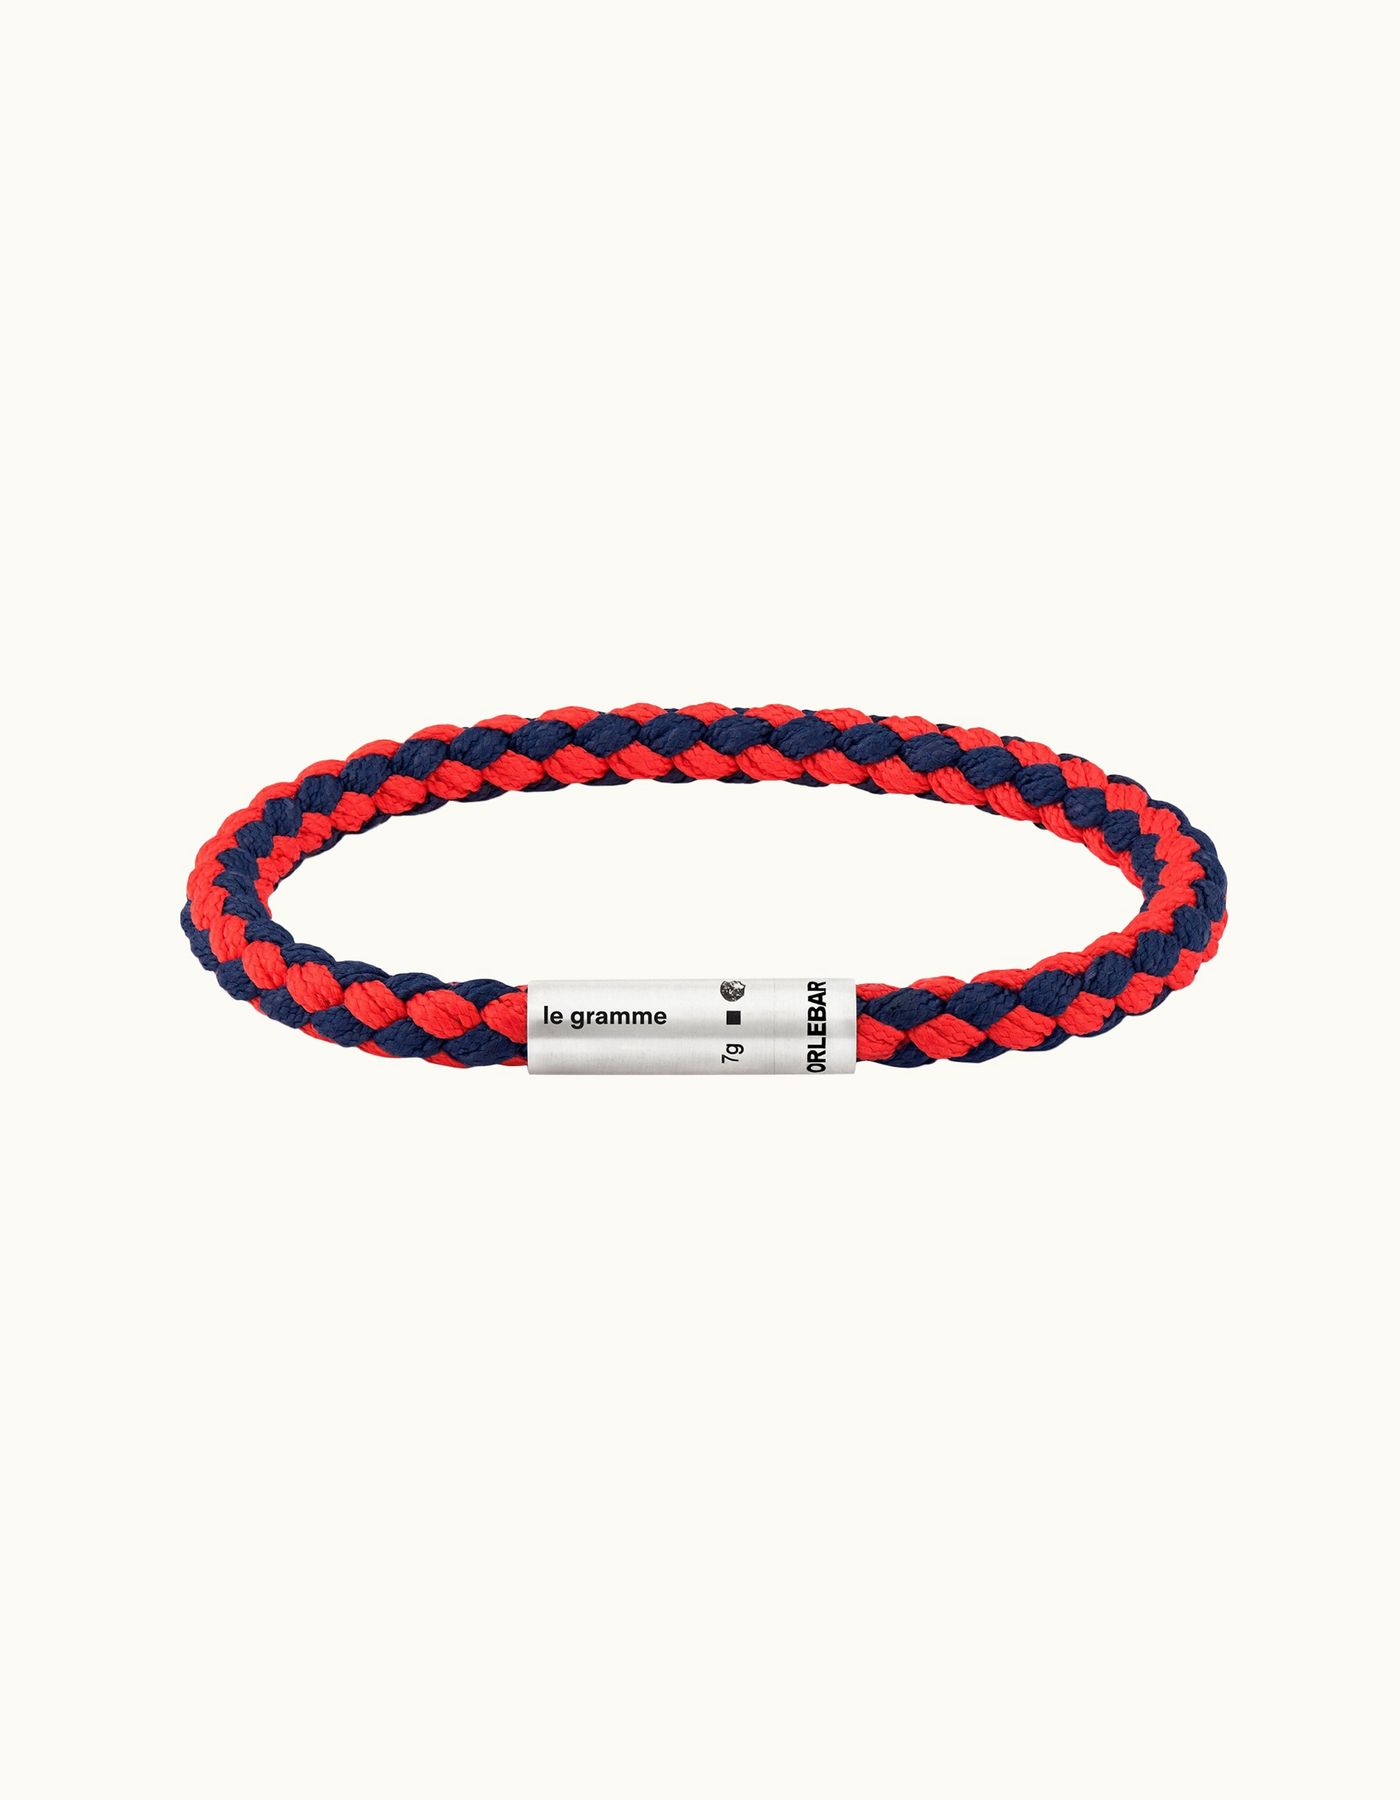 Nato - Mens Navy and red Orlebar Brown x le gramme cable bracelet  